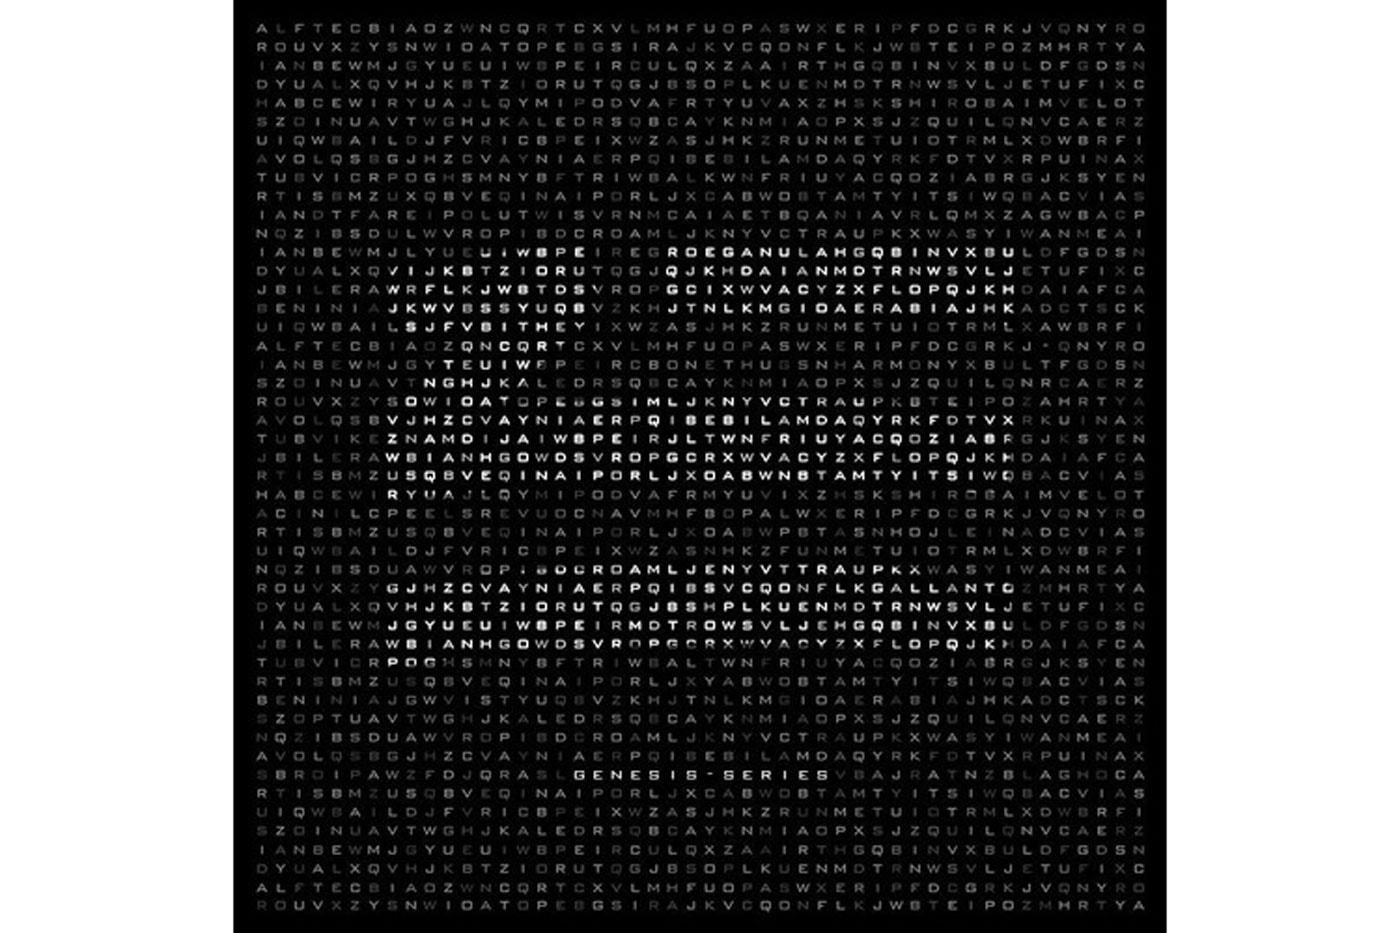 Preview ZHU's 'Genesis Series' Track with AlunaGeorge